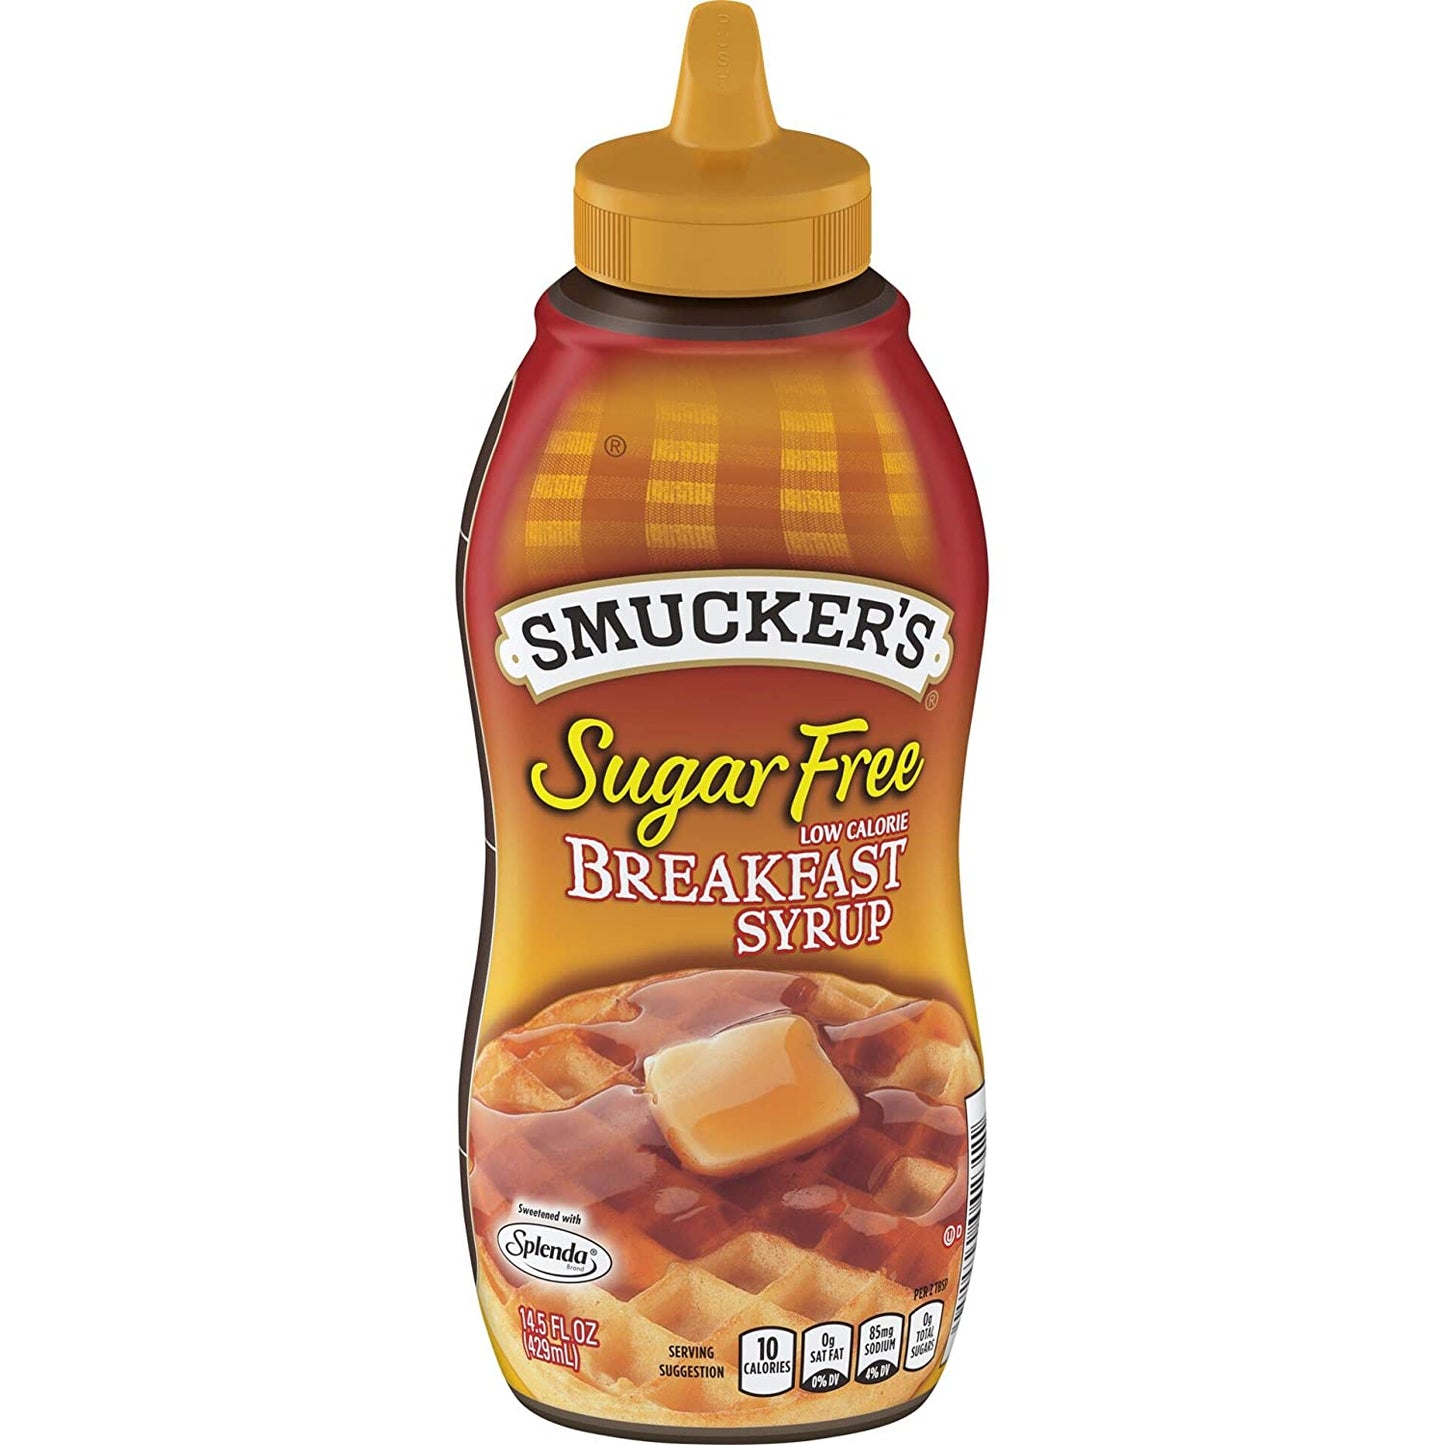 Smucker's Sugar Free Breakfast Syrup, 14.5 Ounces (Pack of 12)